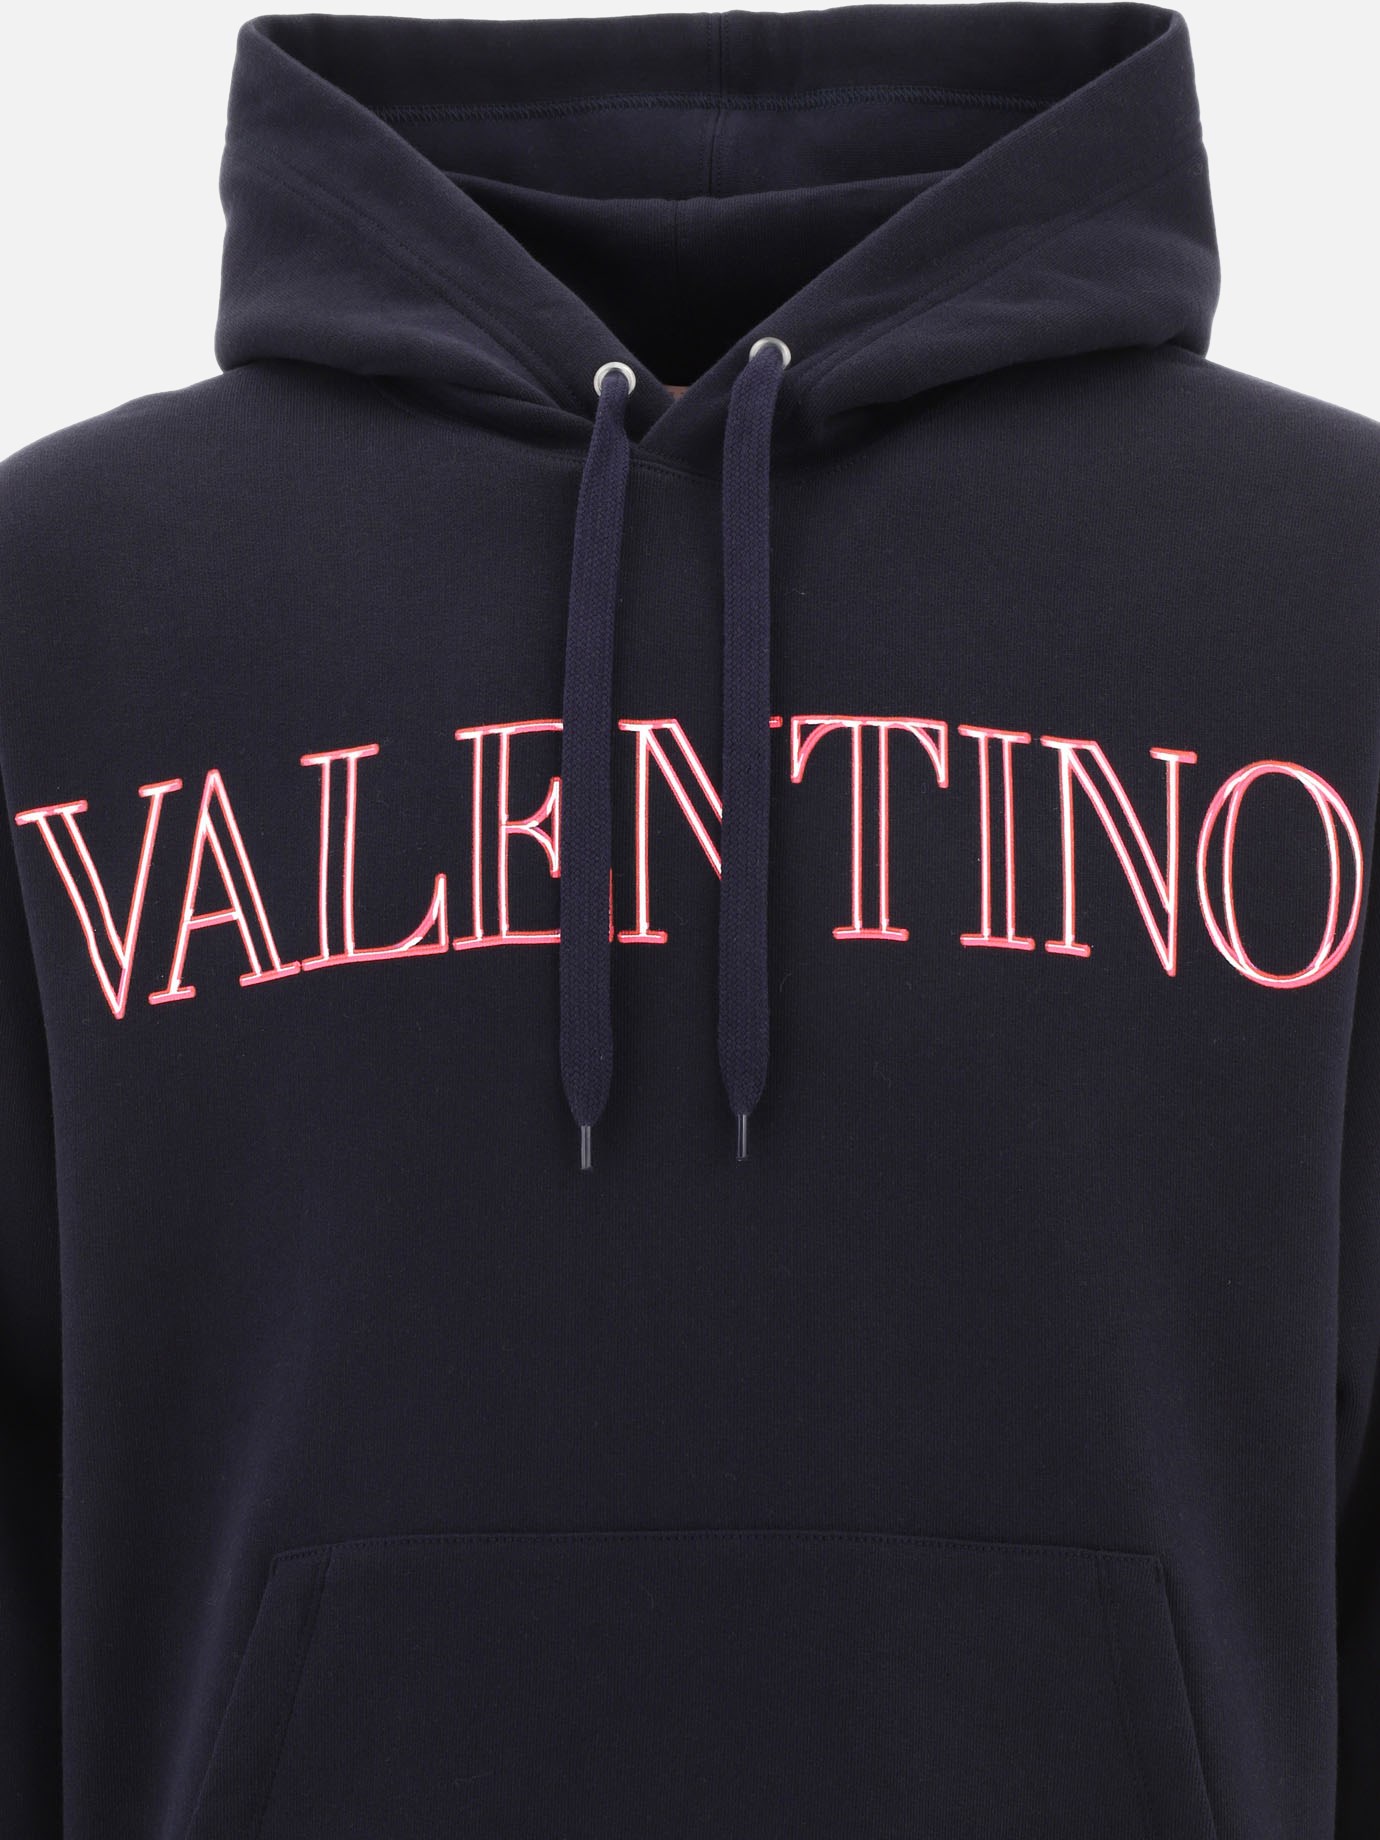  Neon Universe  hoodie by Valentino